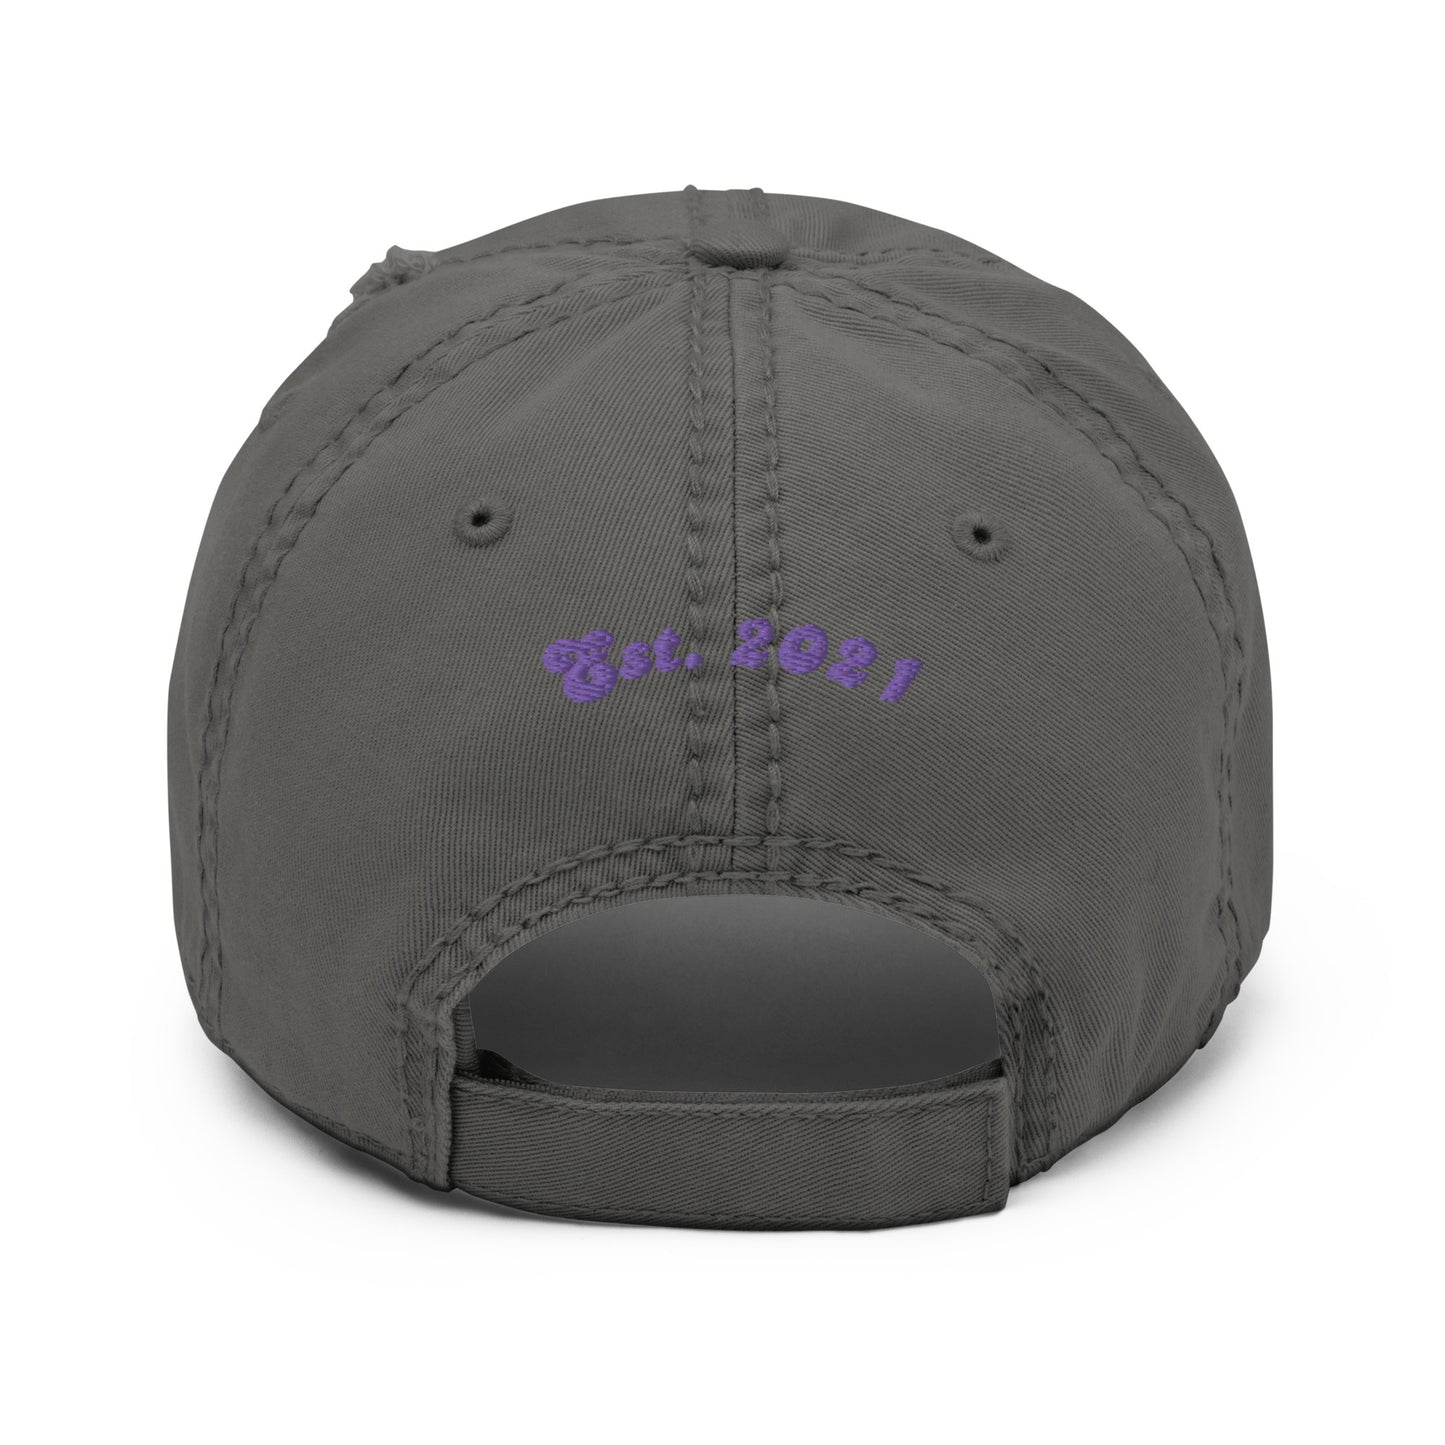 PoNY embroidered distressed dad hat [Purple font]